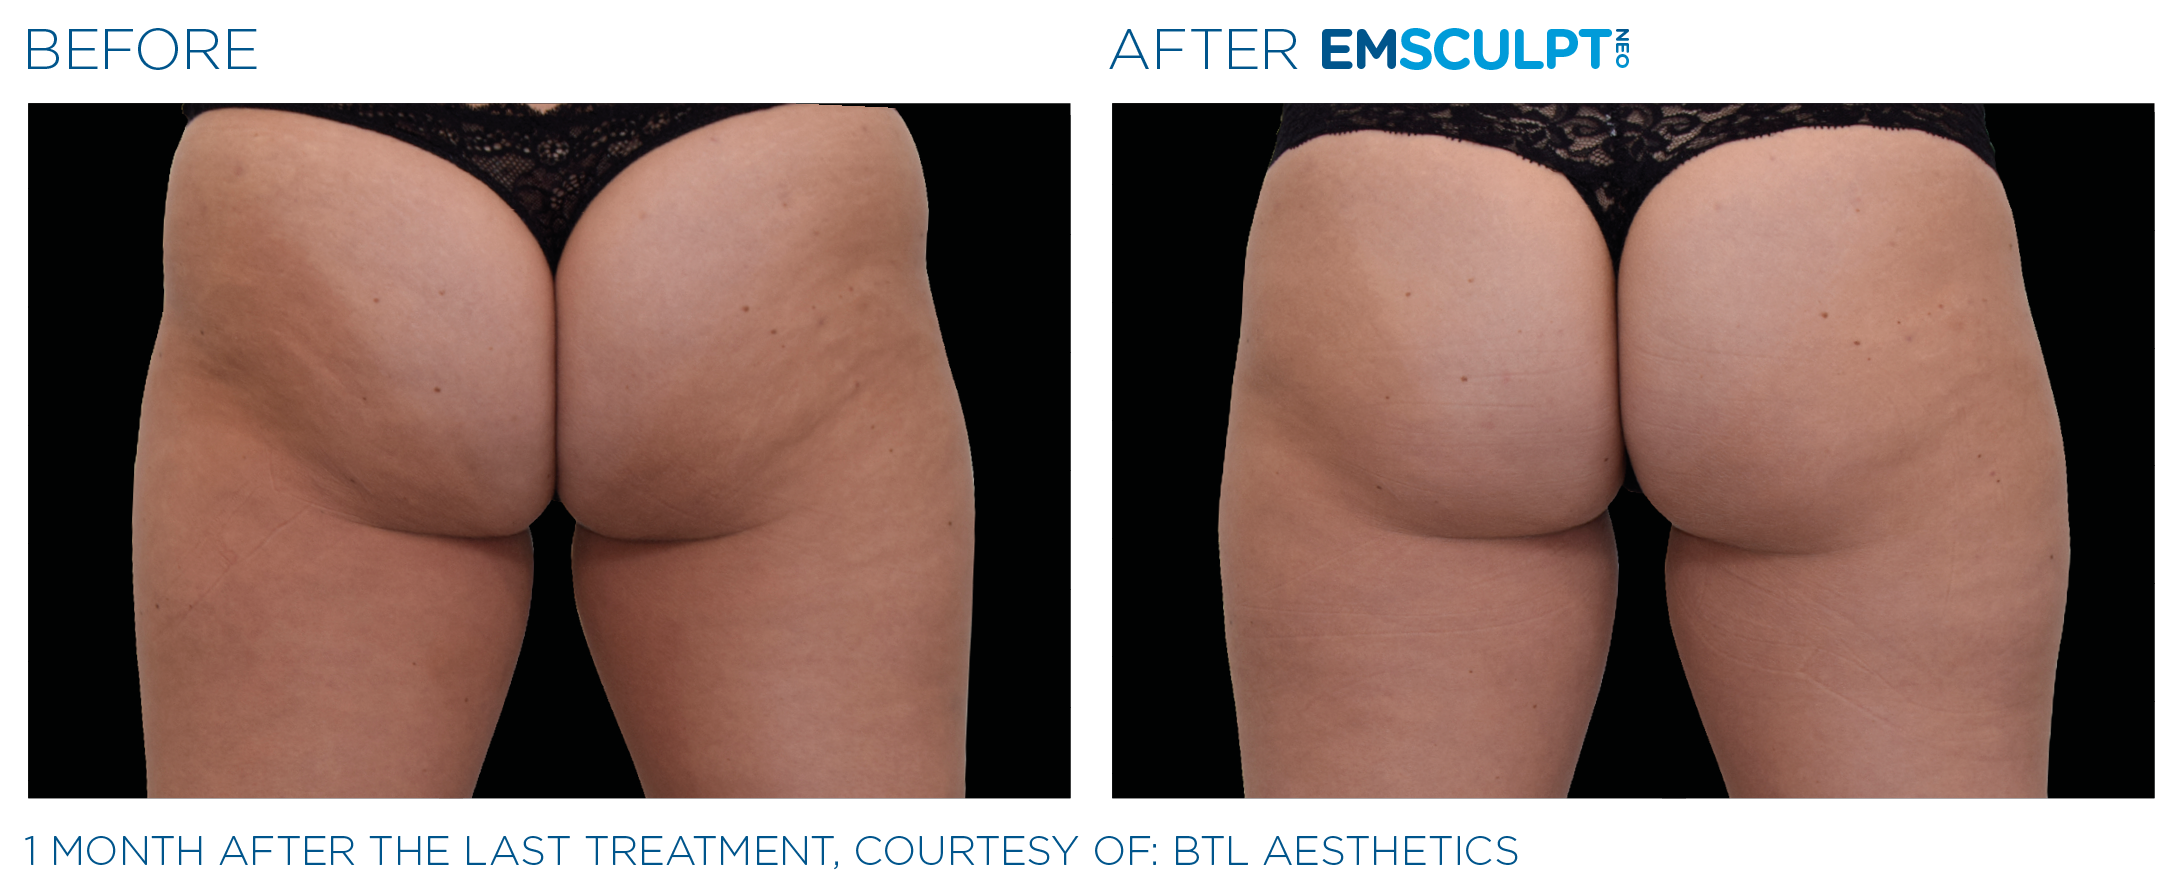 Female Buttock Before and After Emsculpt neo